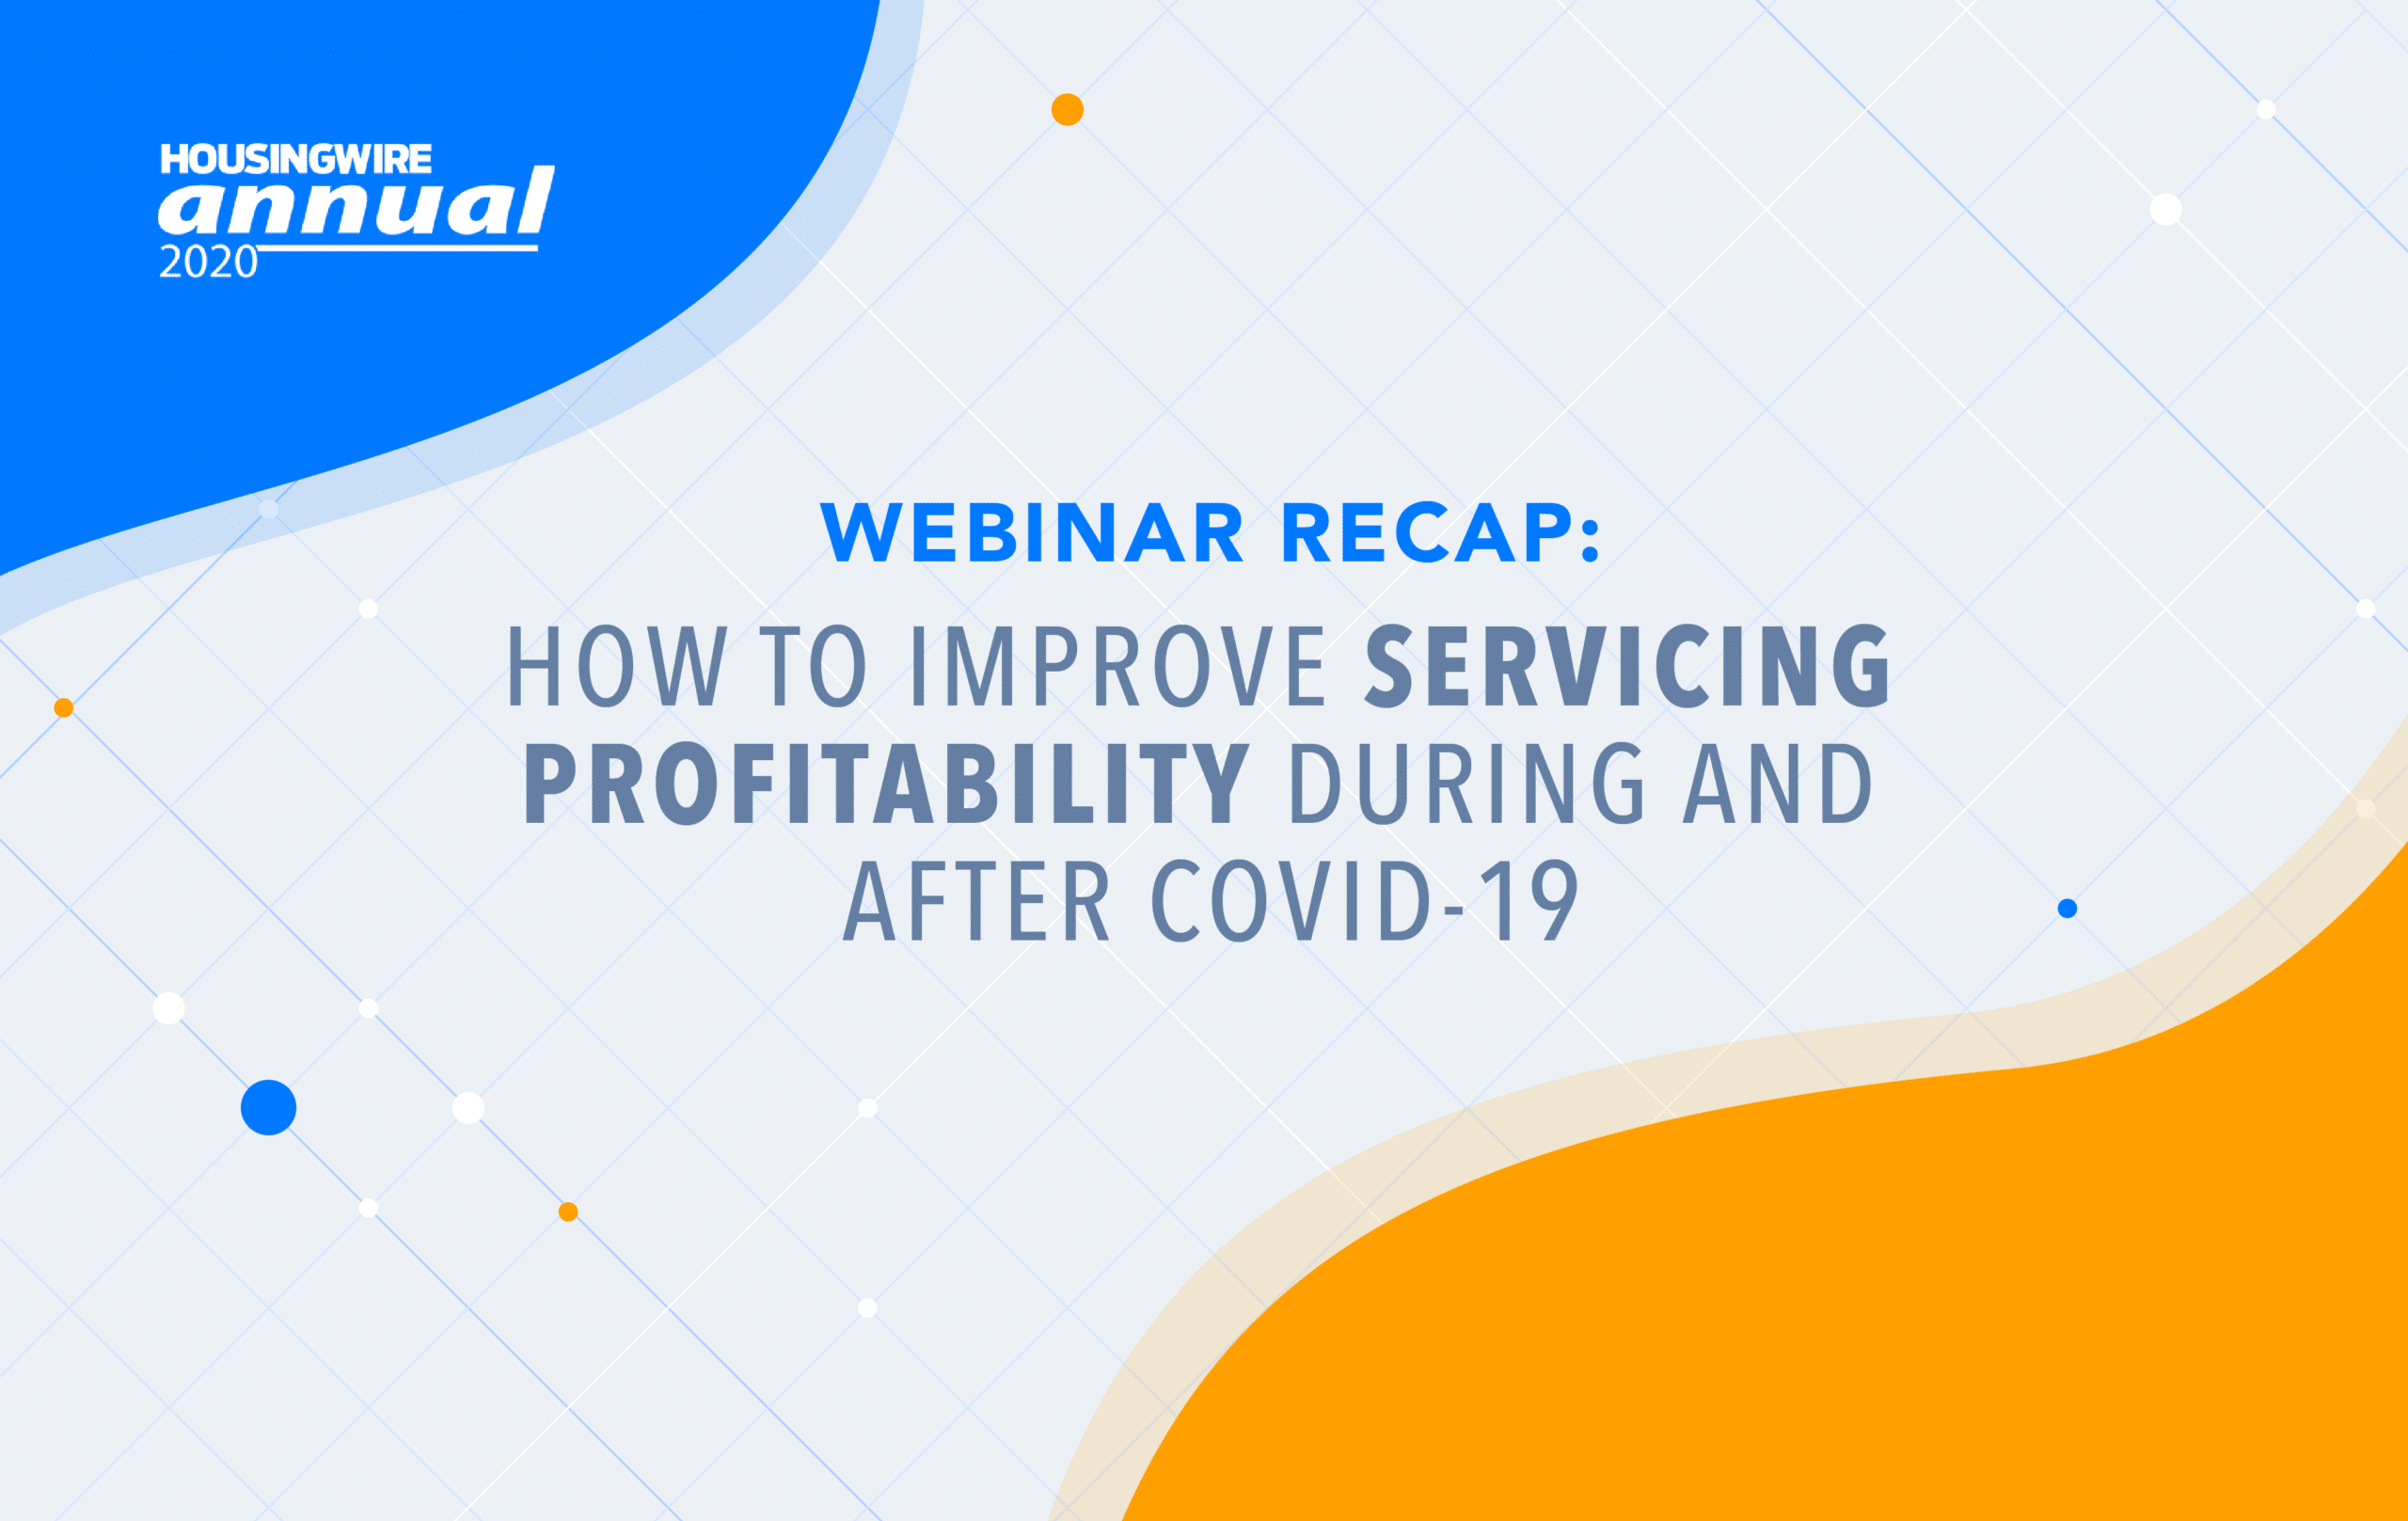 Watch the webinar recap: how to improve servicing profitability during and after covid-19